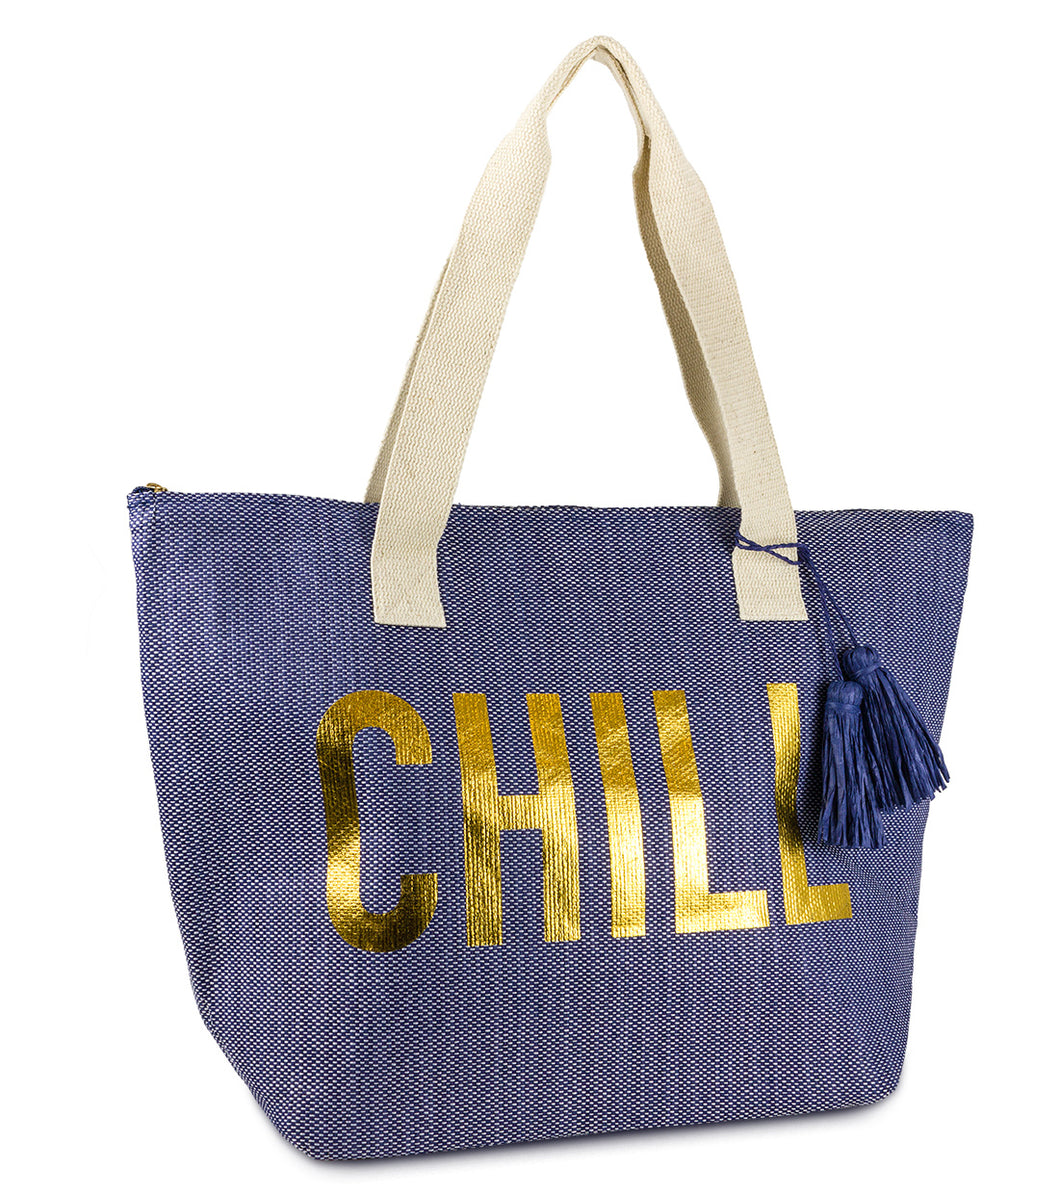 Chill Tote with Tassels - Just Jamie